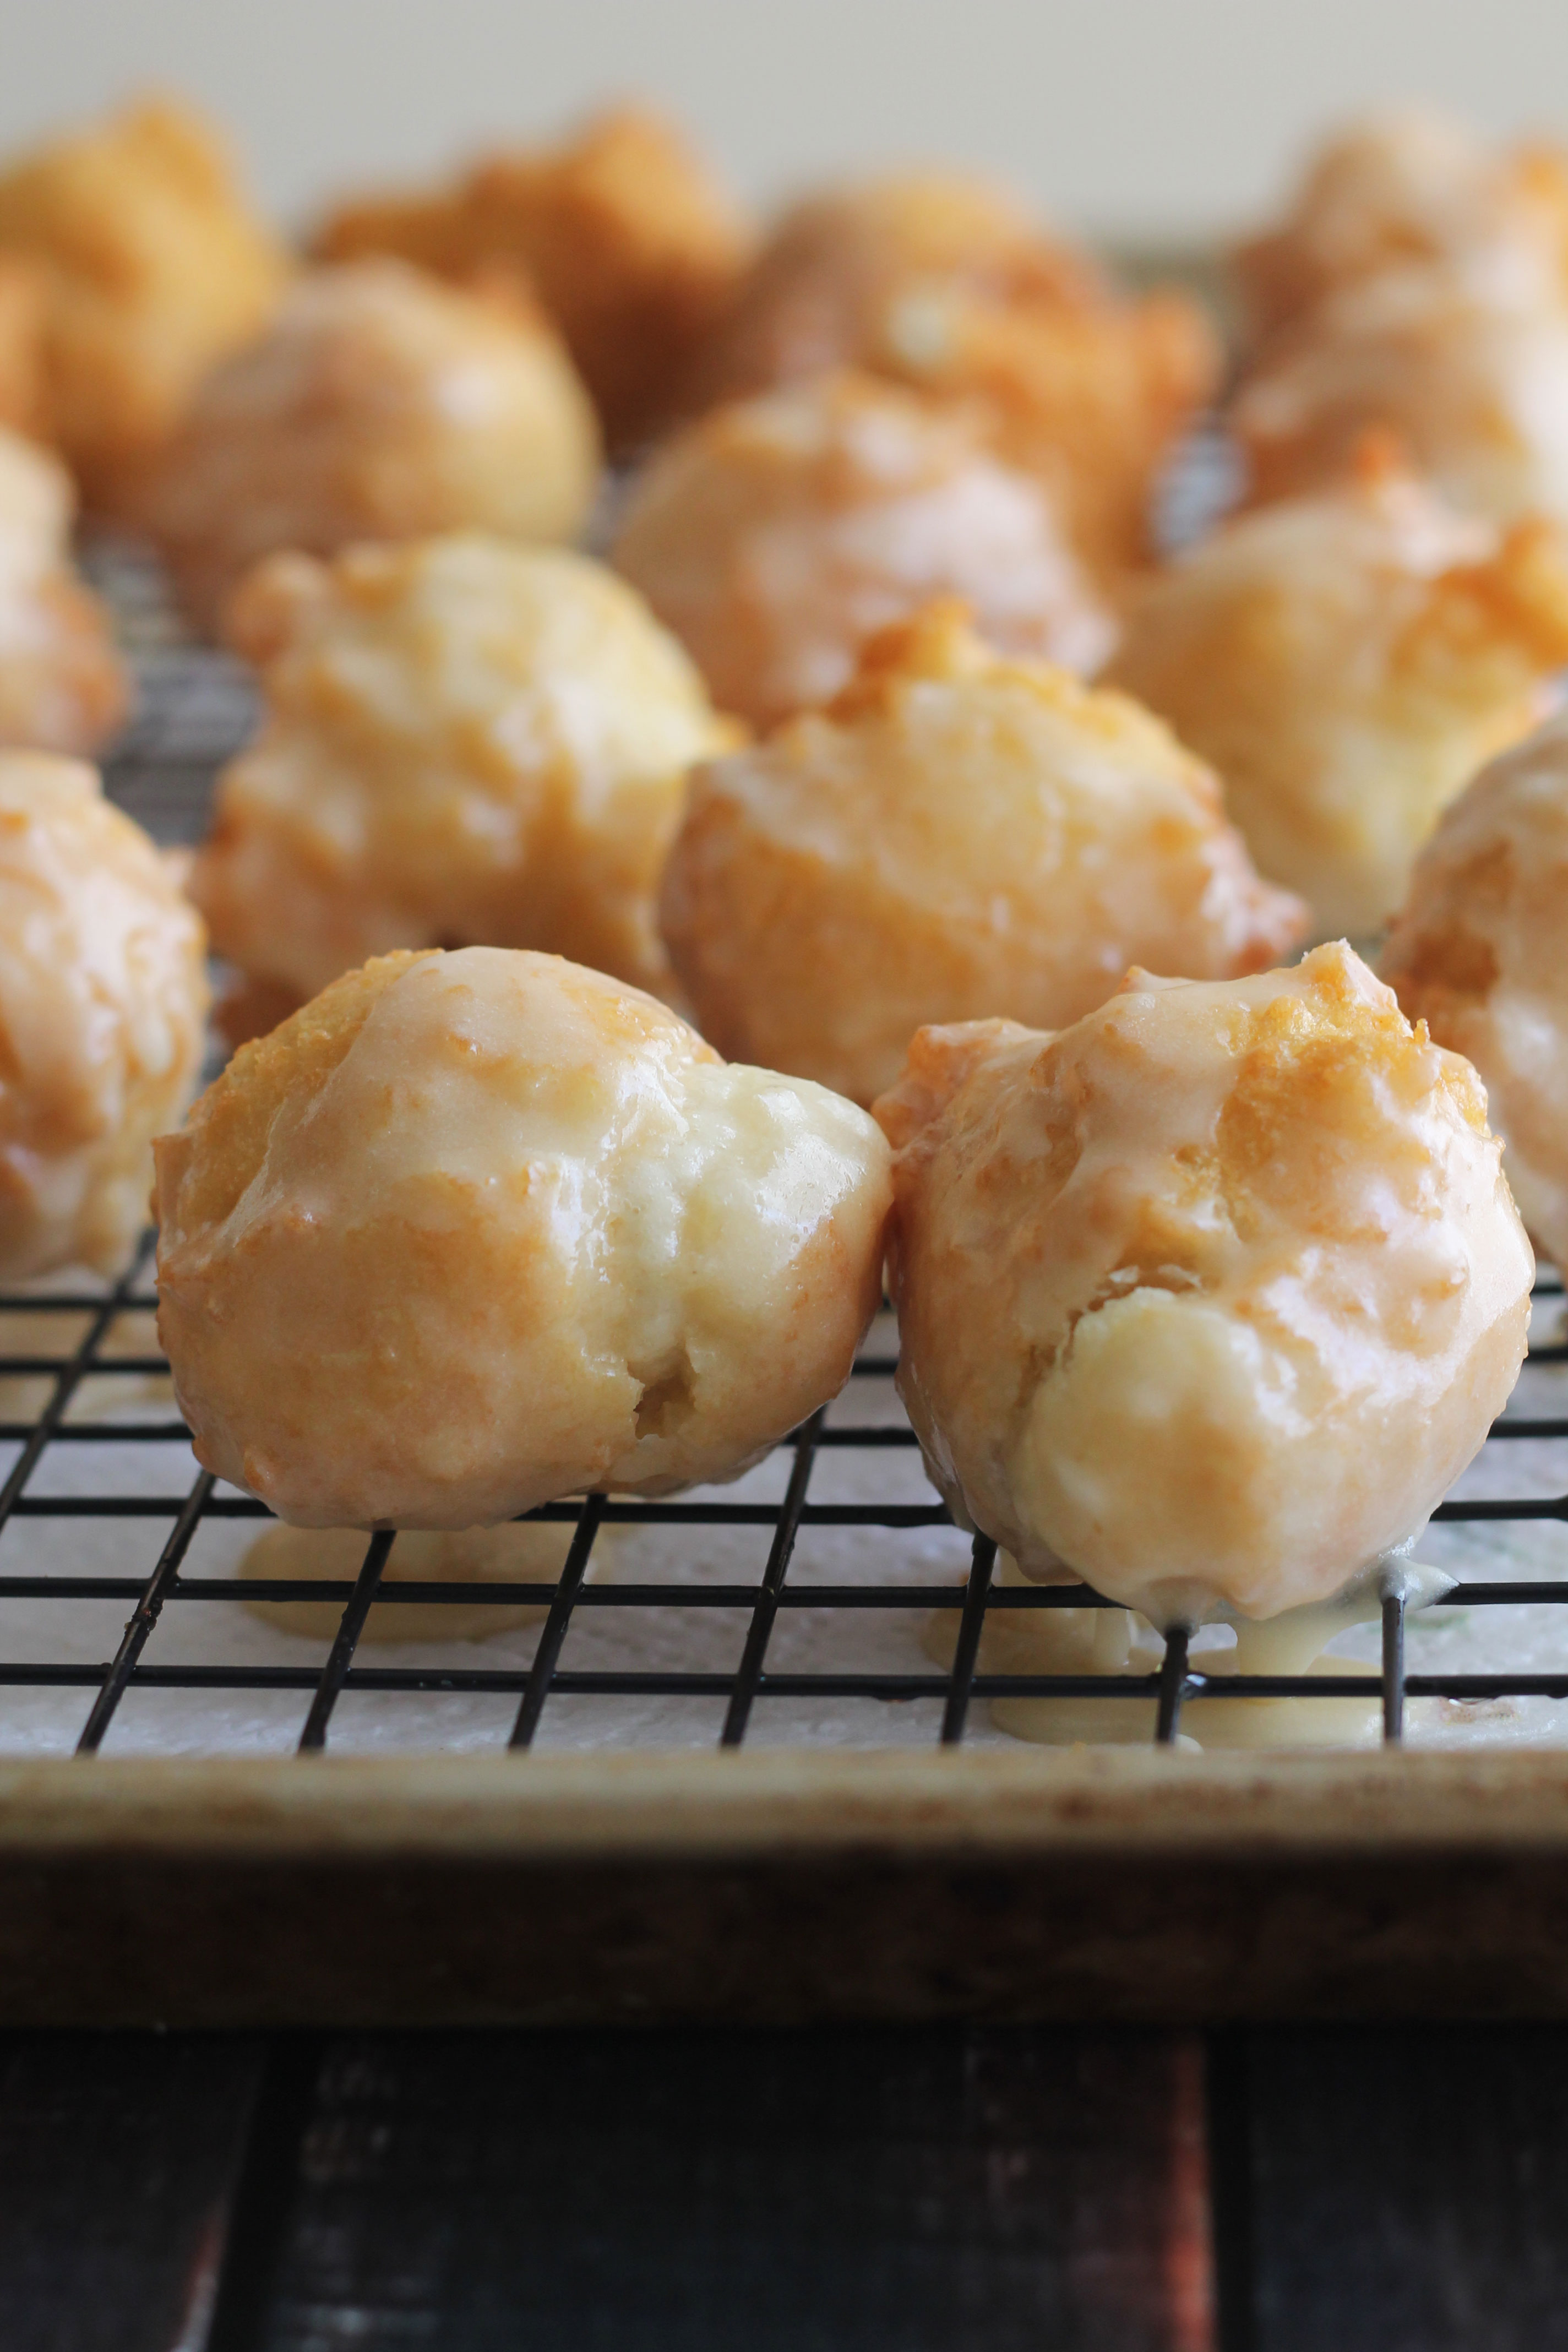 So unbelievably good. Little donut holes fried and covered in a sweet maple glaze!